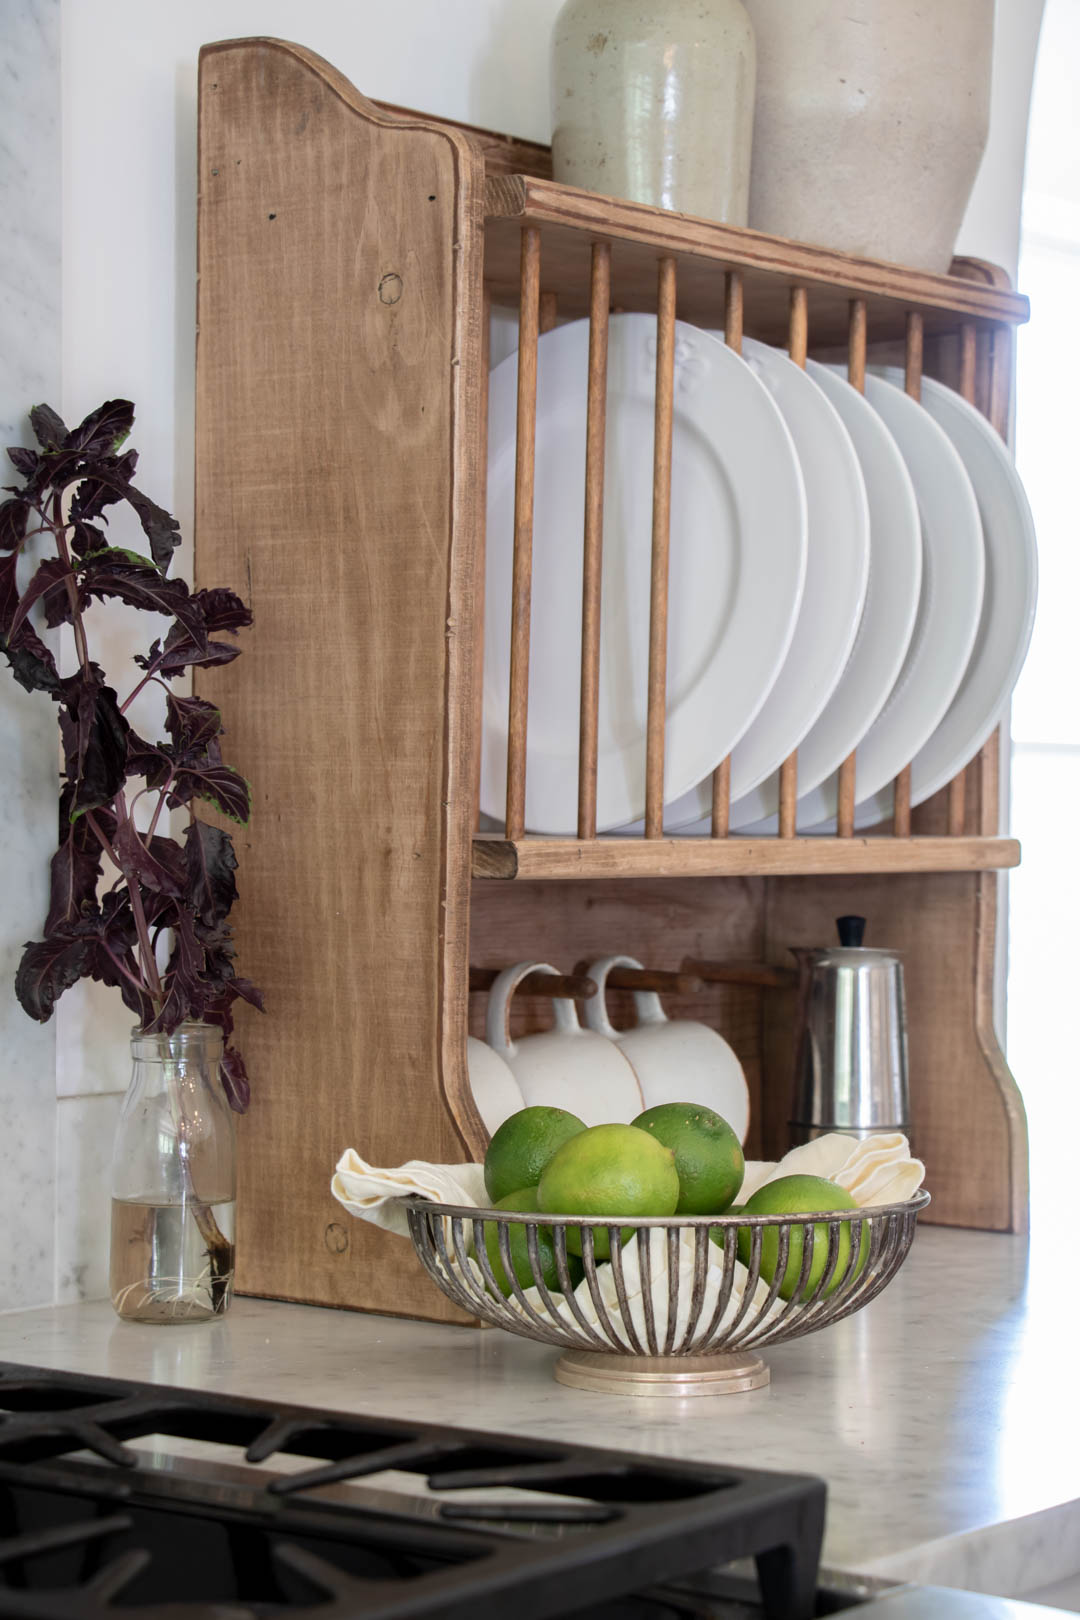 Different Ways to use an Old Farmhouse Dishrack - Deb and Danelle